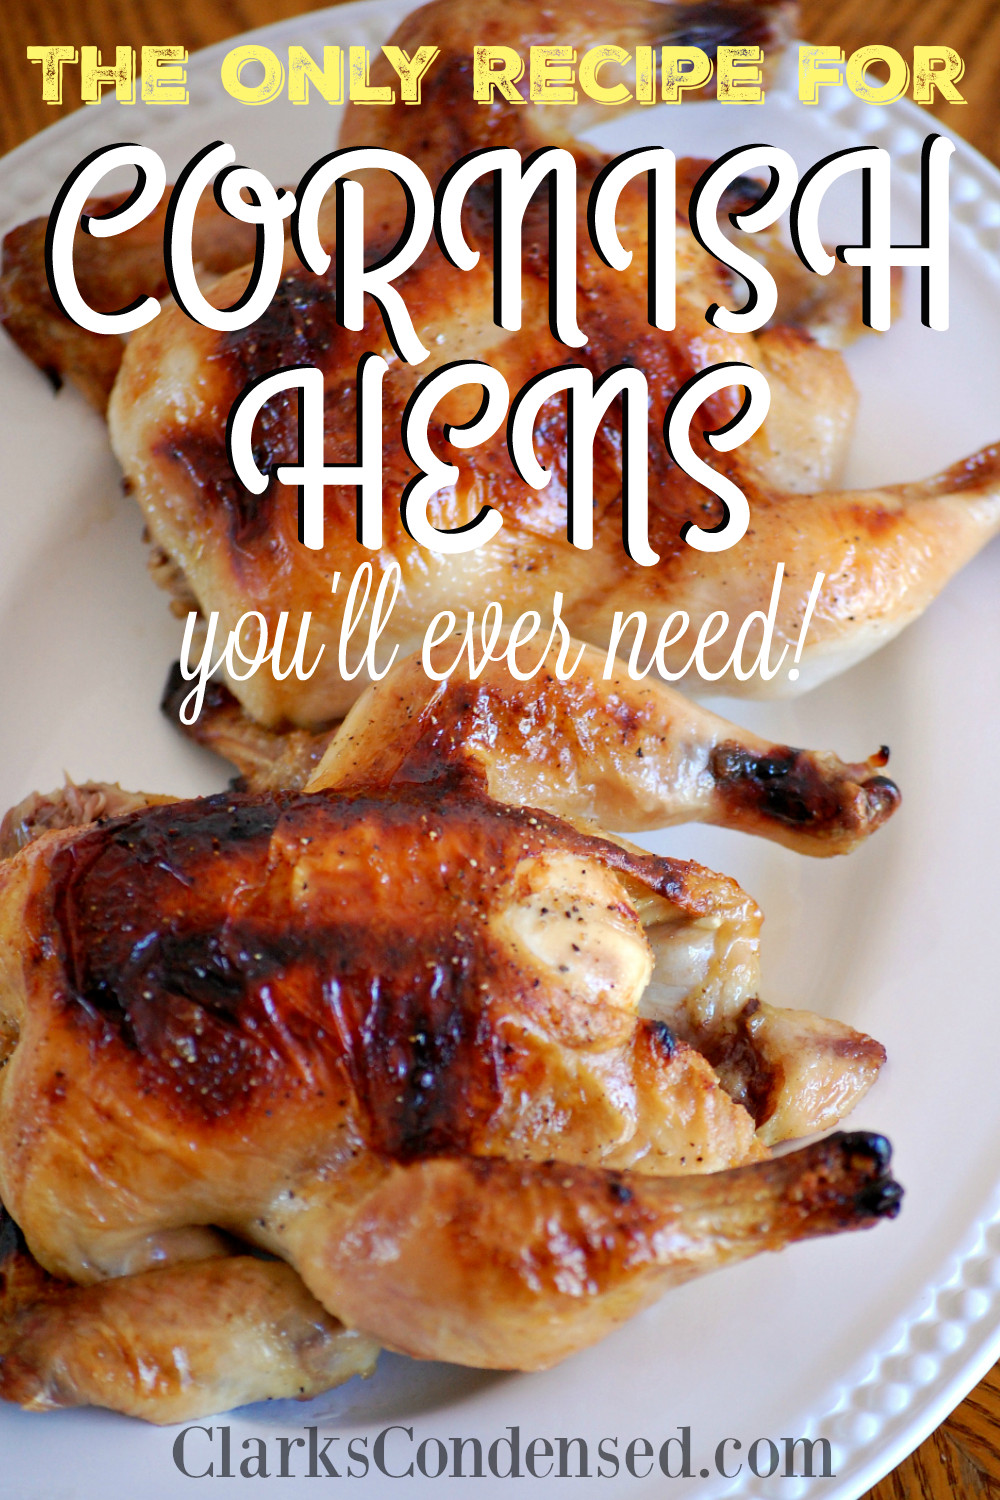 Recipe Cornish Game Hens
 The ly Recipe for Cornish Hens You Will Ever Need